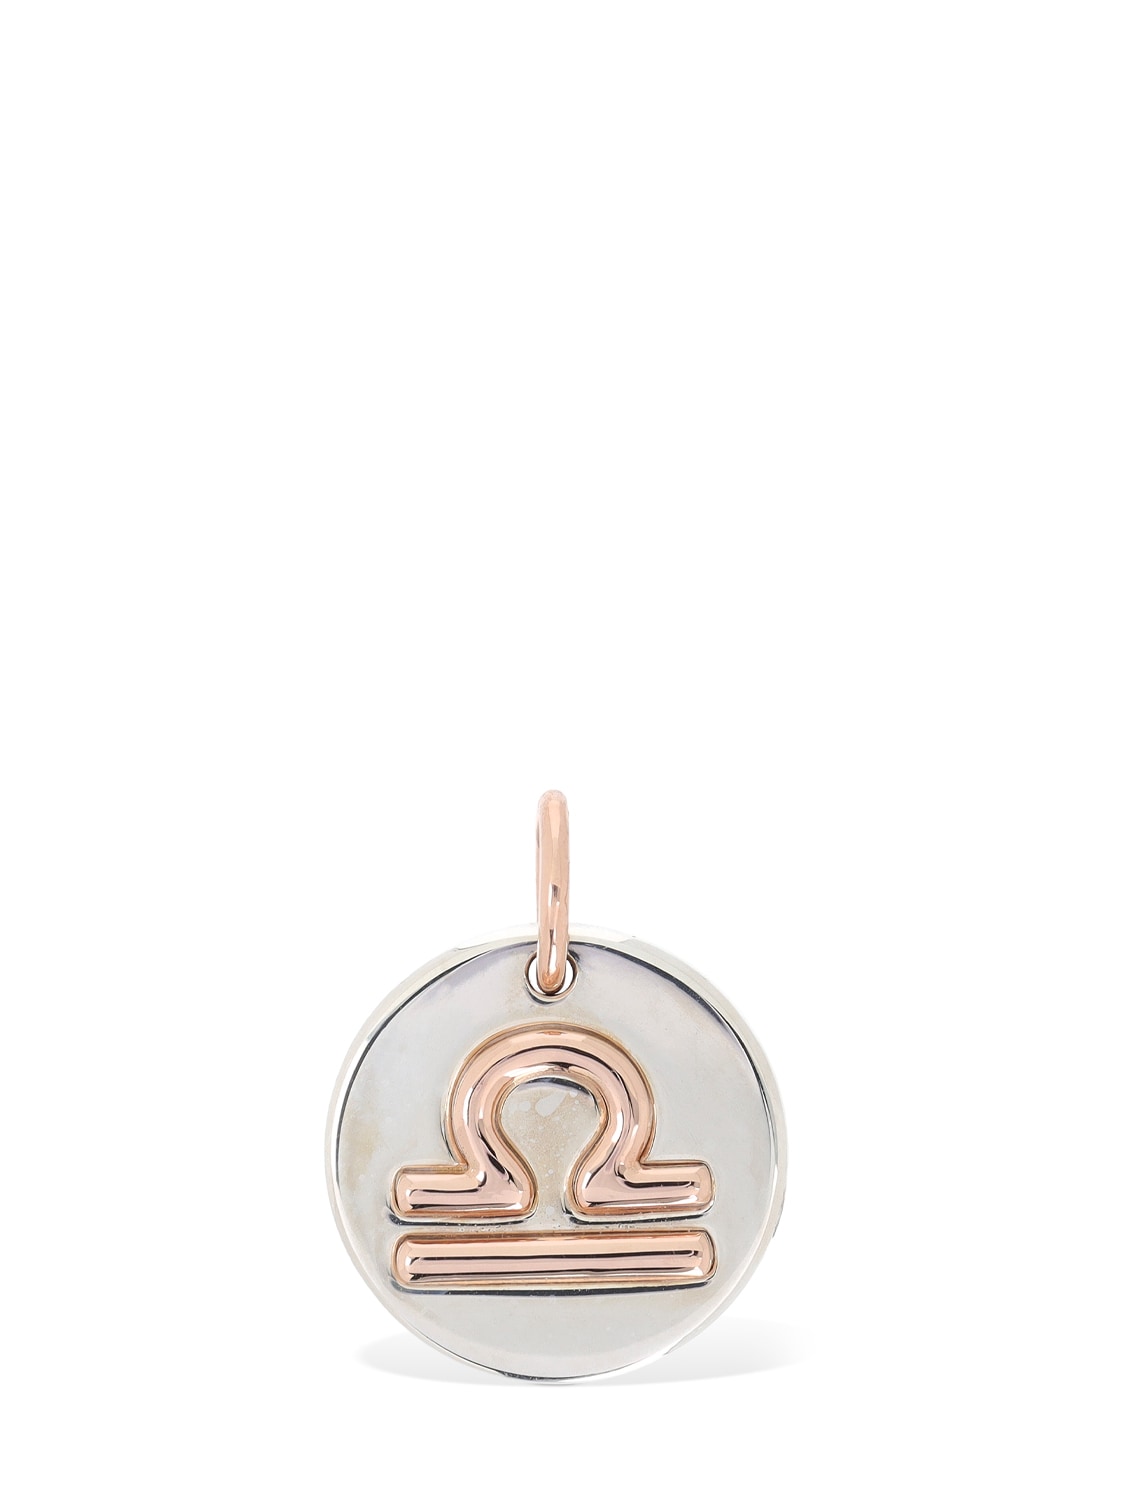 Image of 9kt Rose Gold & Silver Libra Charm